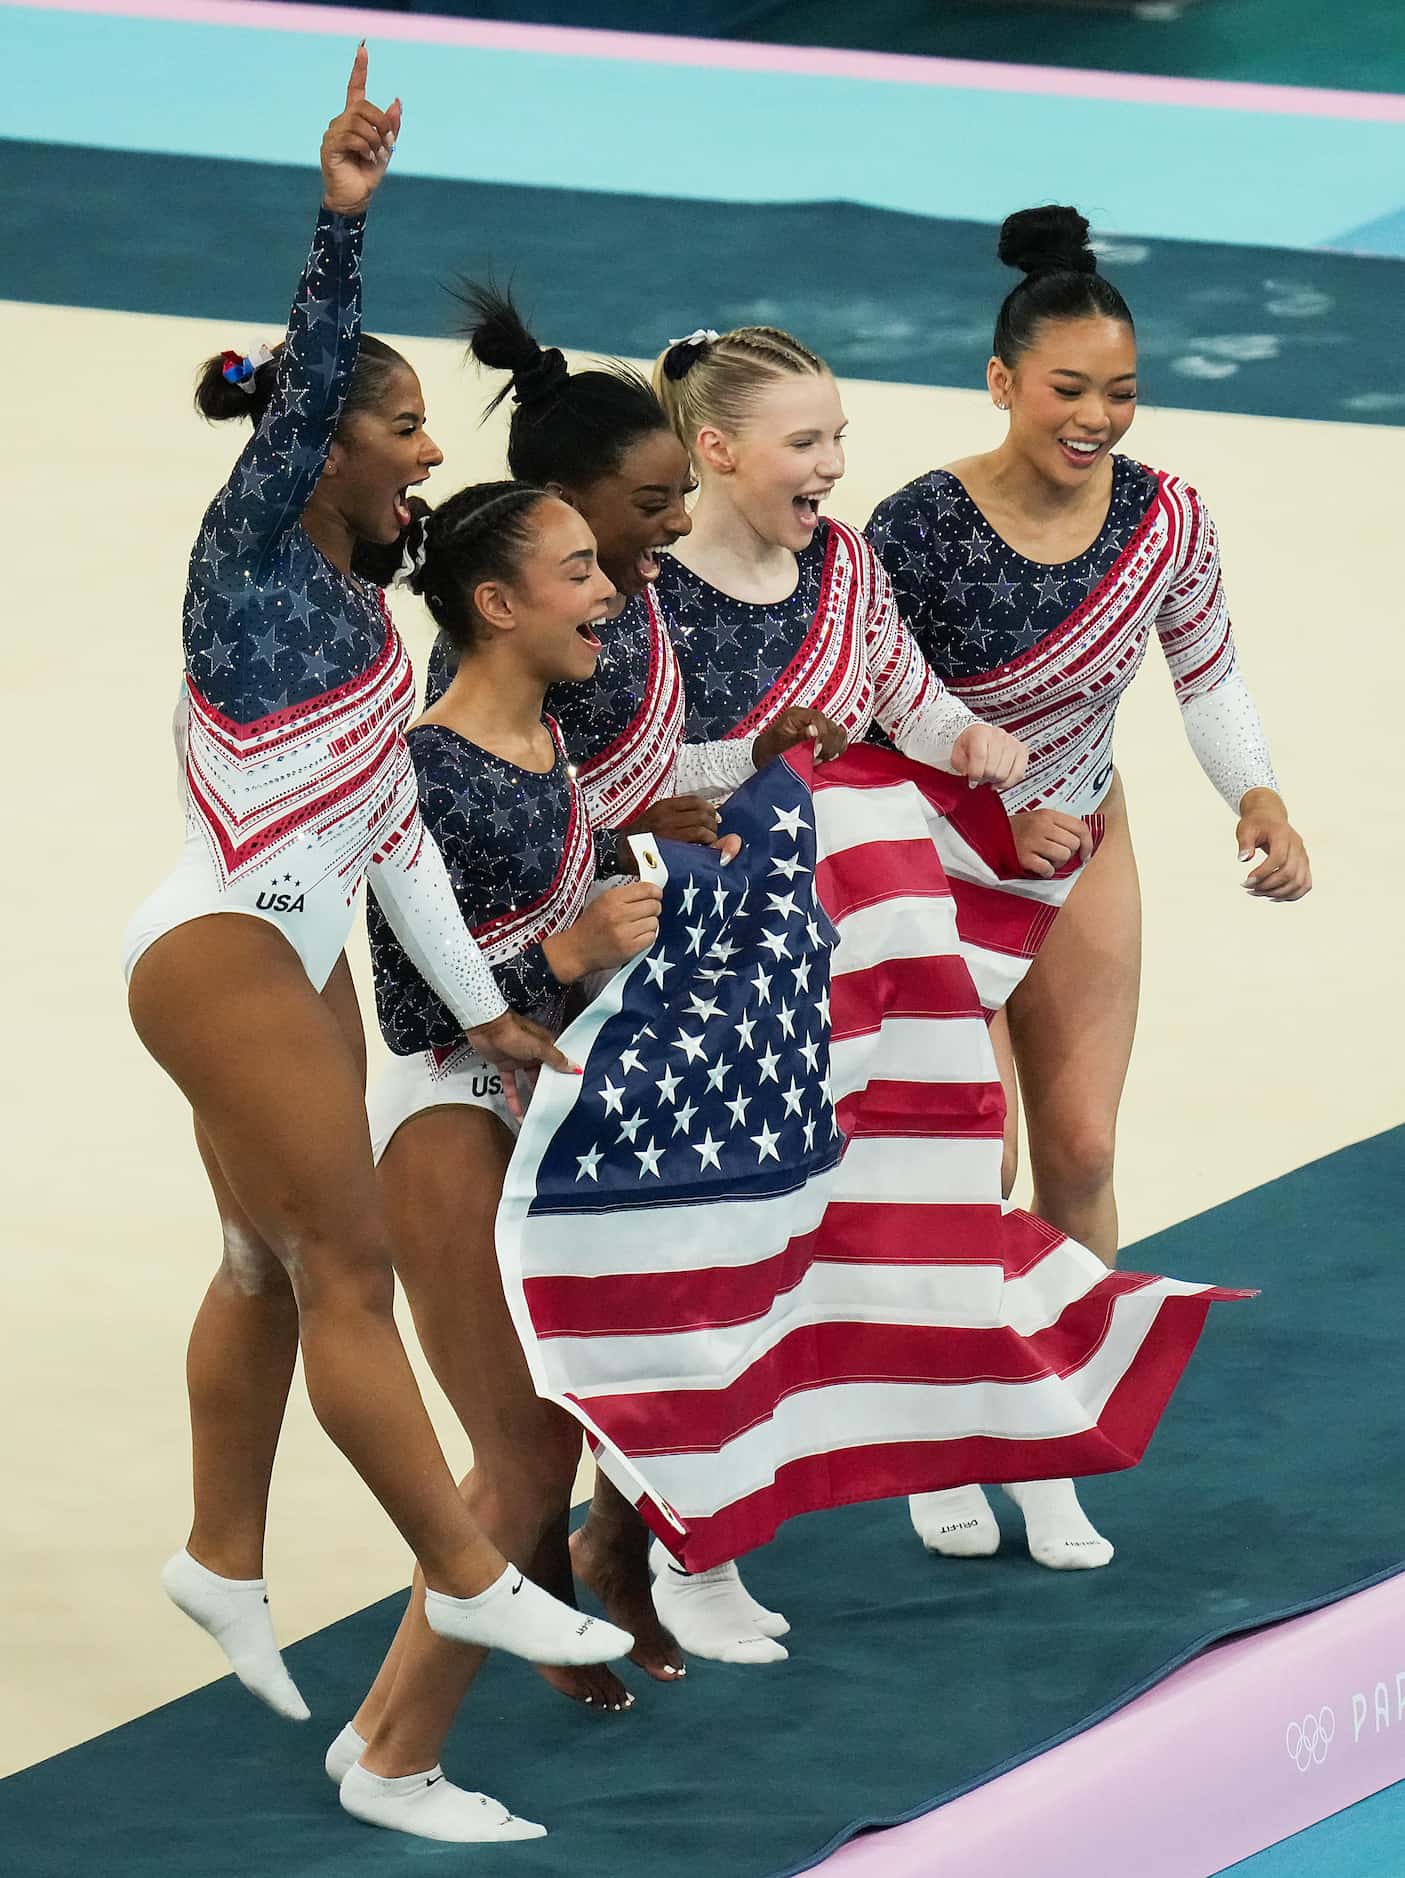 From left, Jordan Chiles, Hezly Rivera, Simone Biles, Jade Carey and Suni Lee of the United...